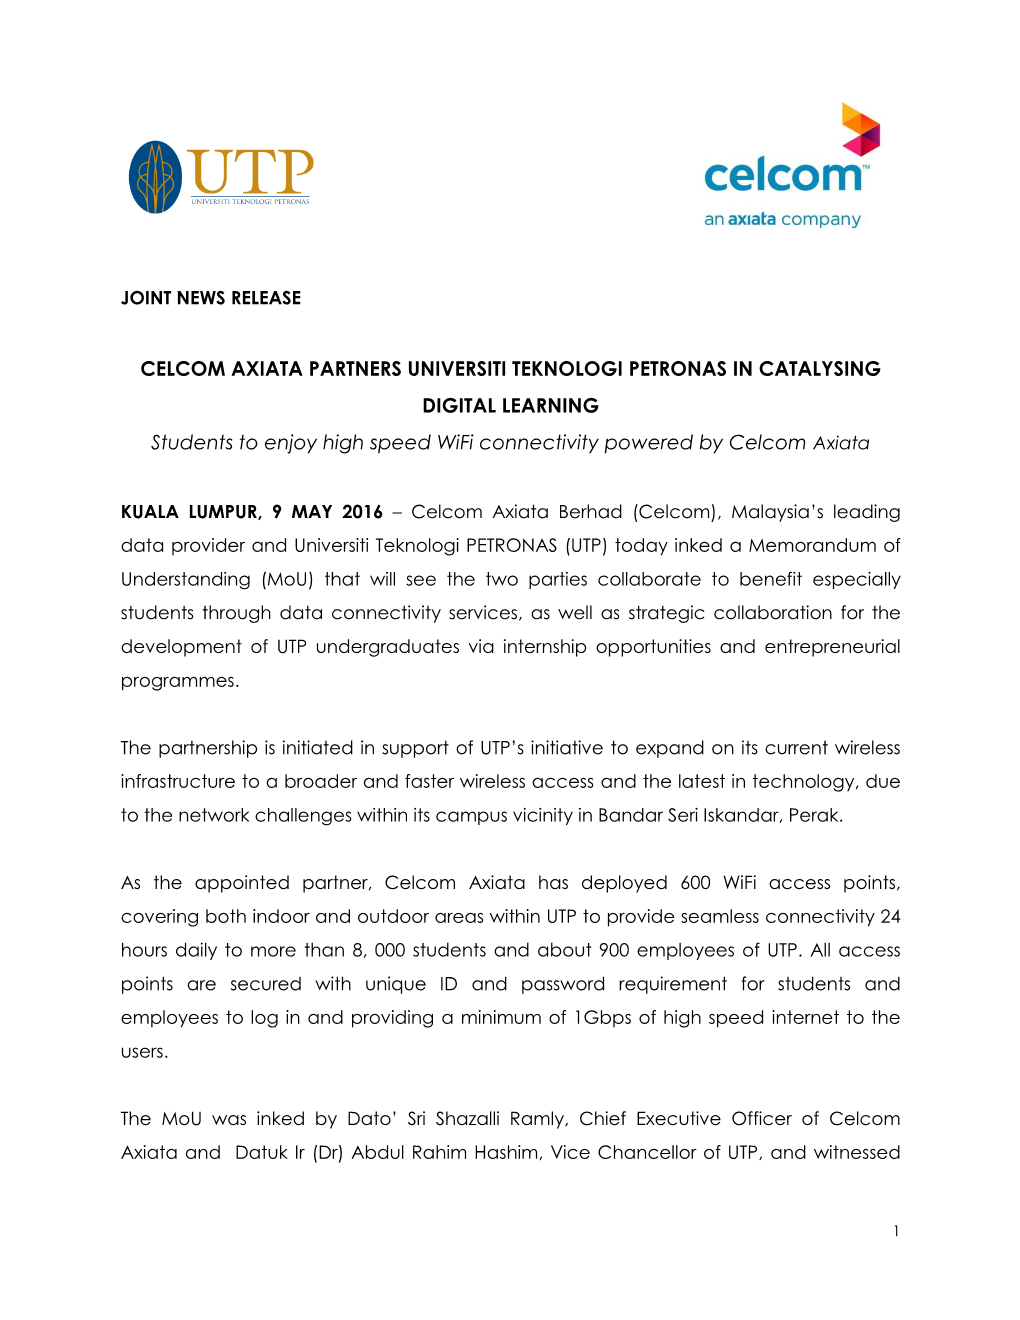 CELCOM AXIATA PARTNERS UNIVERSITI TEKNOLOGI PETRONAS in CATALYSING DIGITAL LEARNING Students to Enjoy High Speed Wifi Connectivity Powered by Celcom Axiata